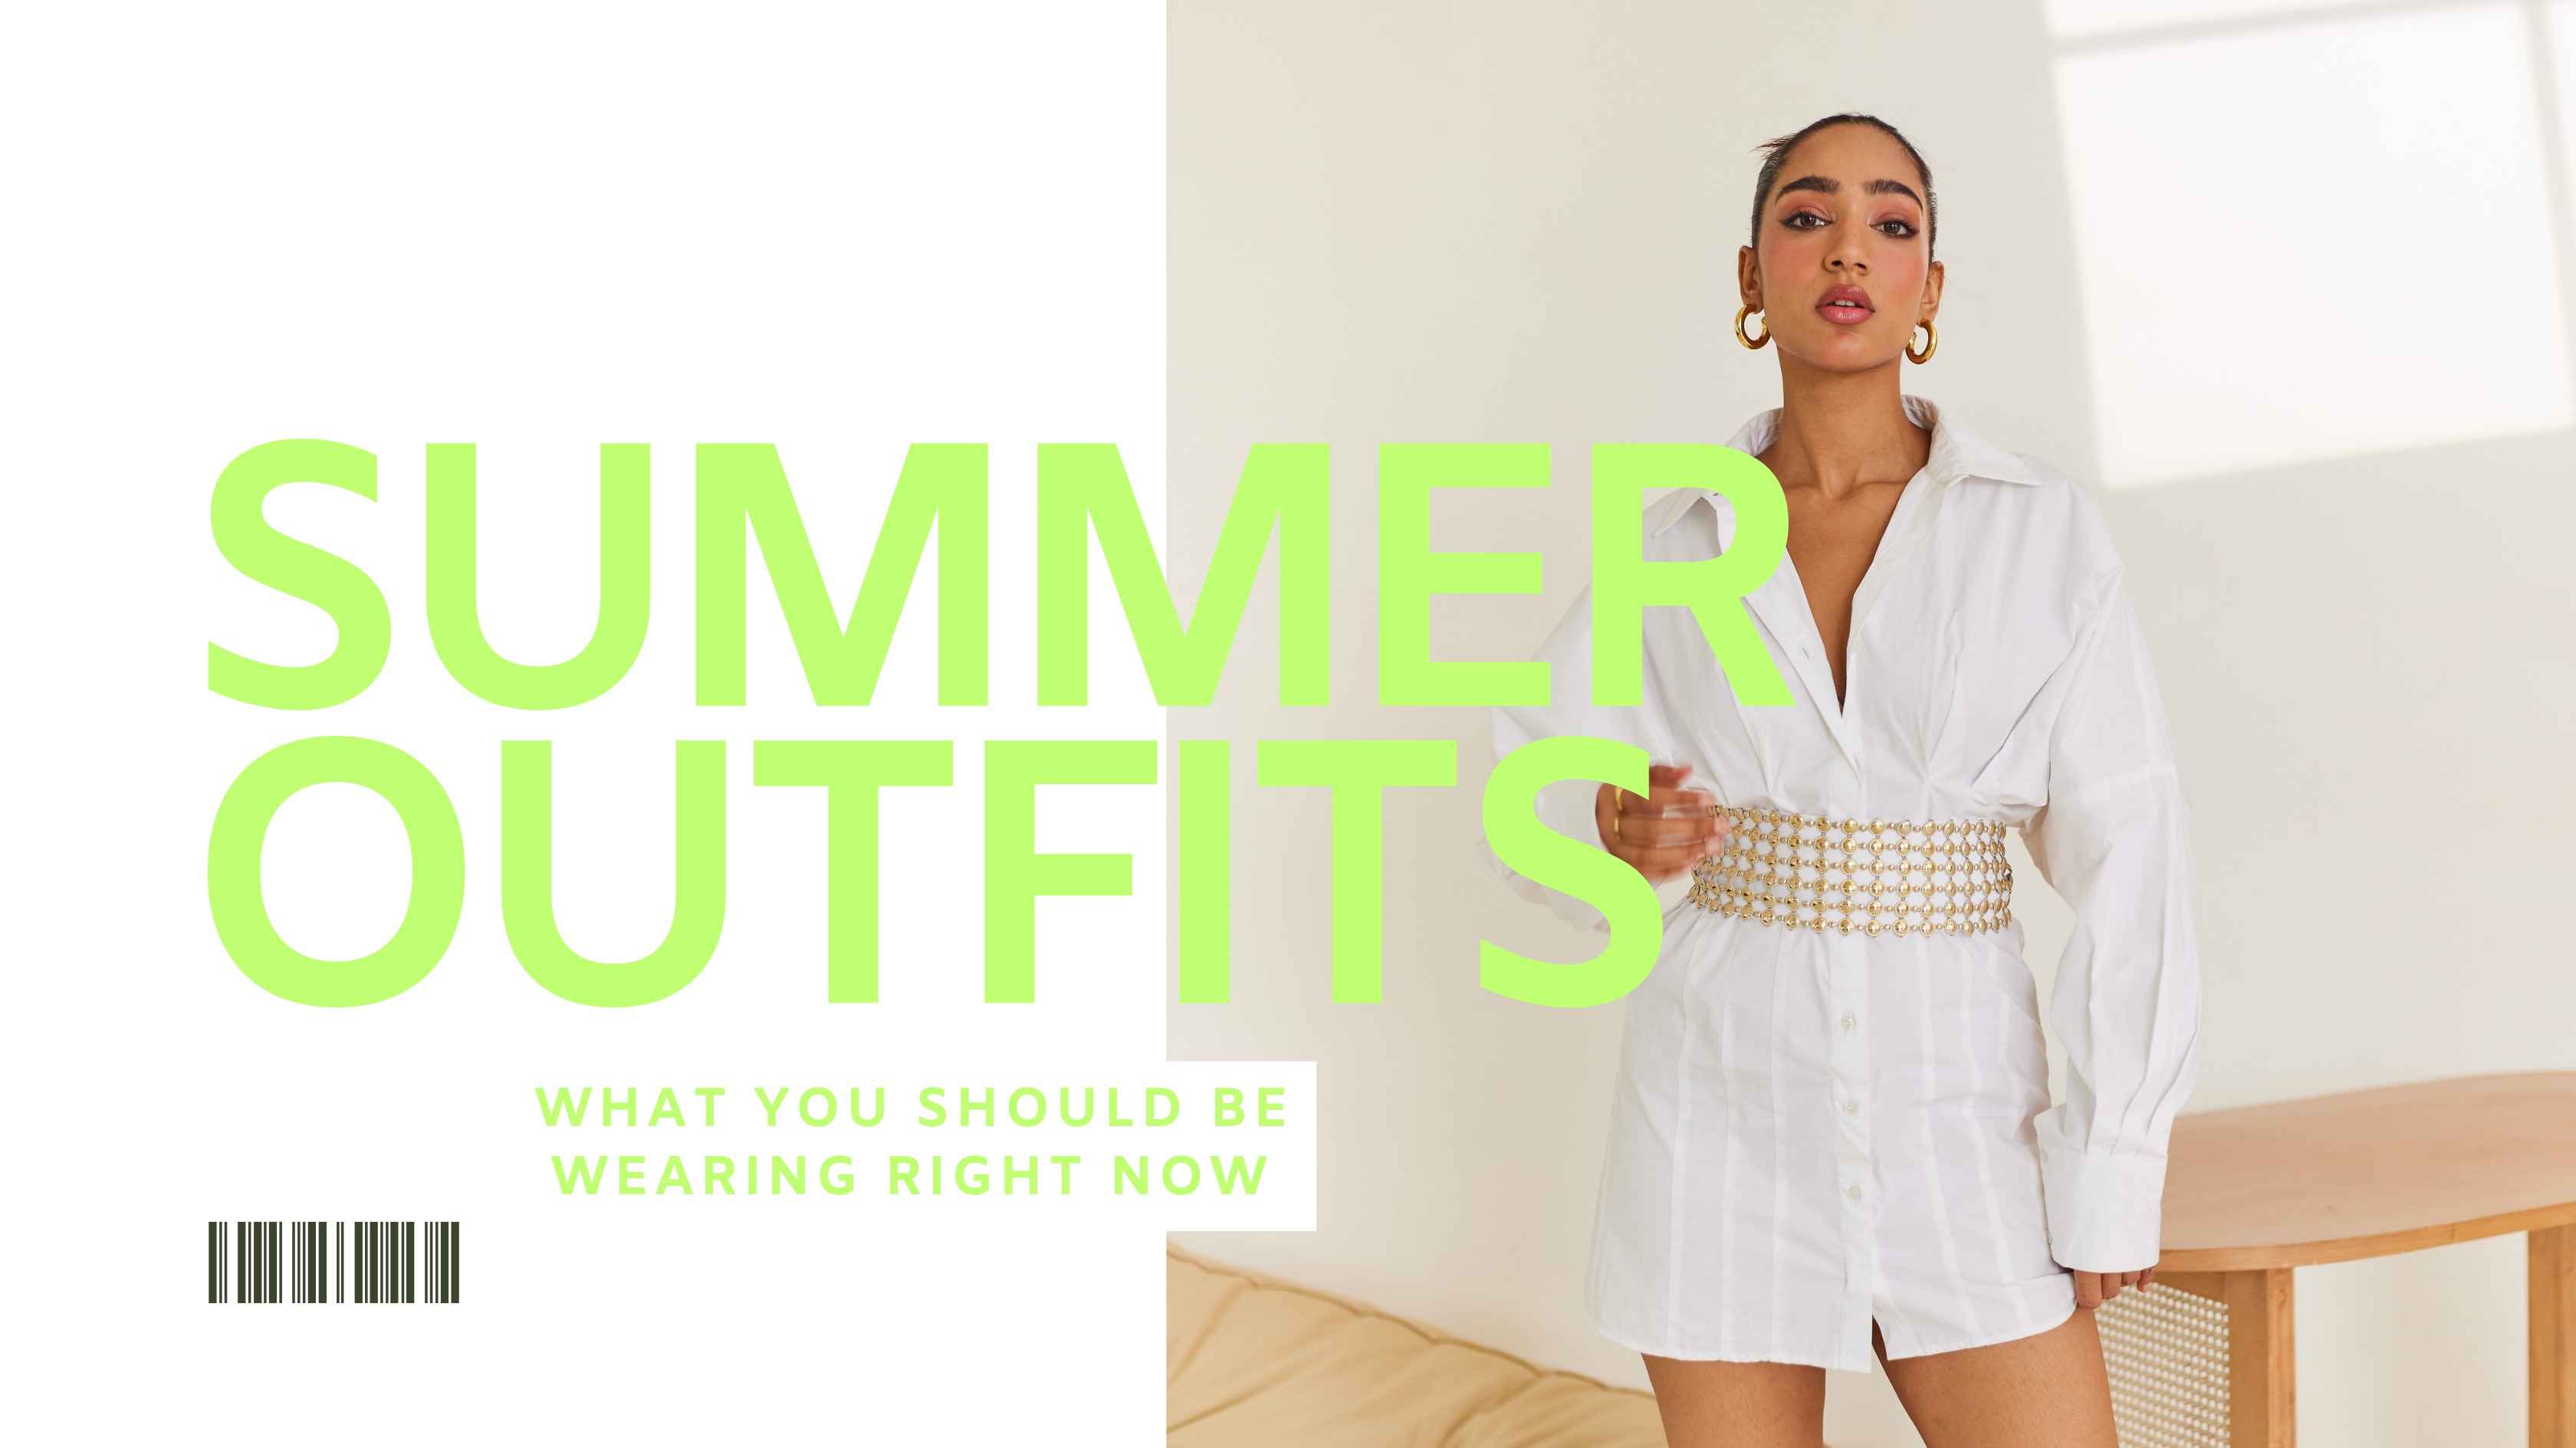 Super Cute Dresses for this Very Hot summer